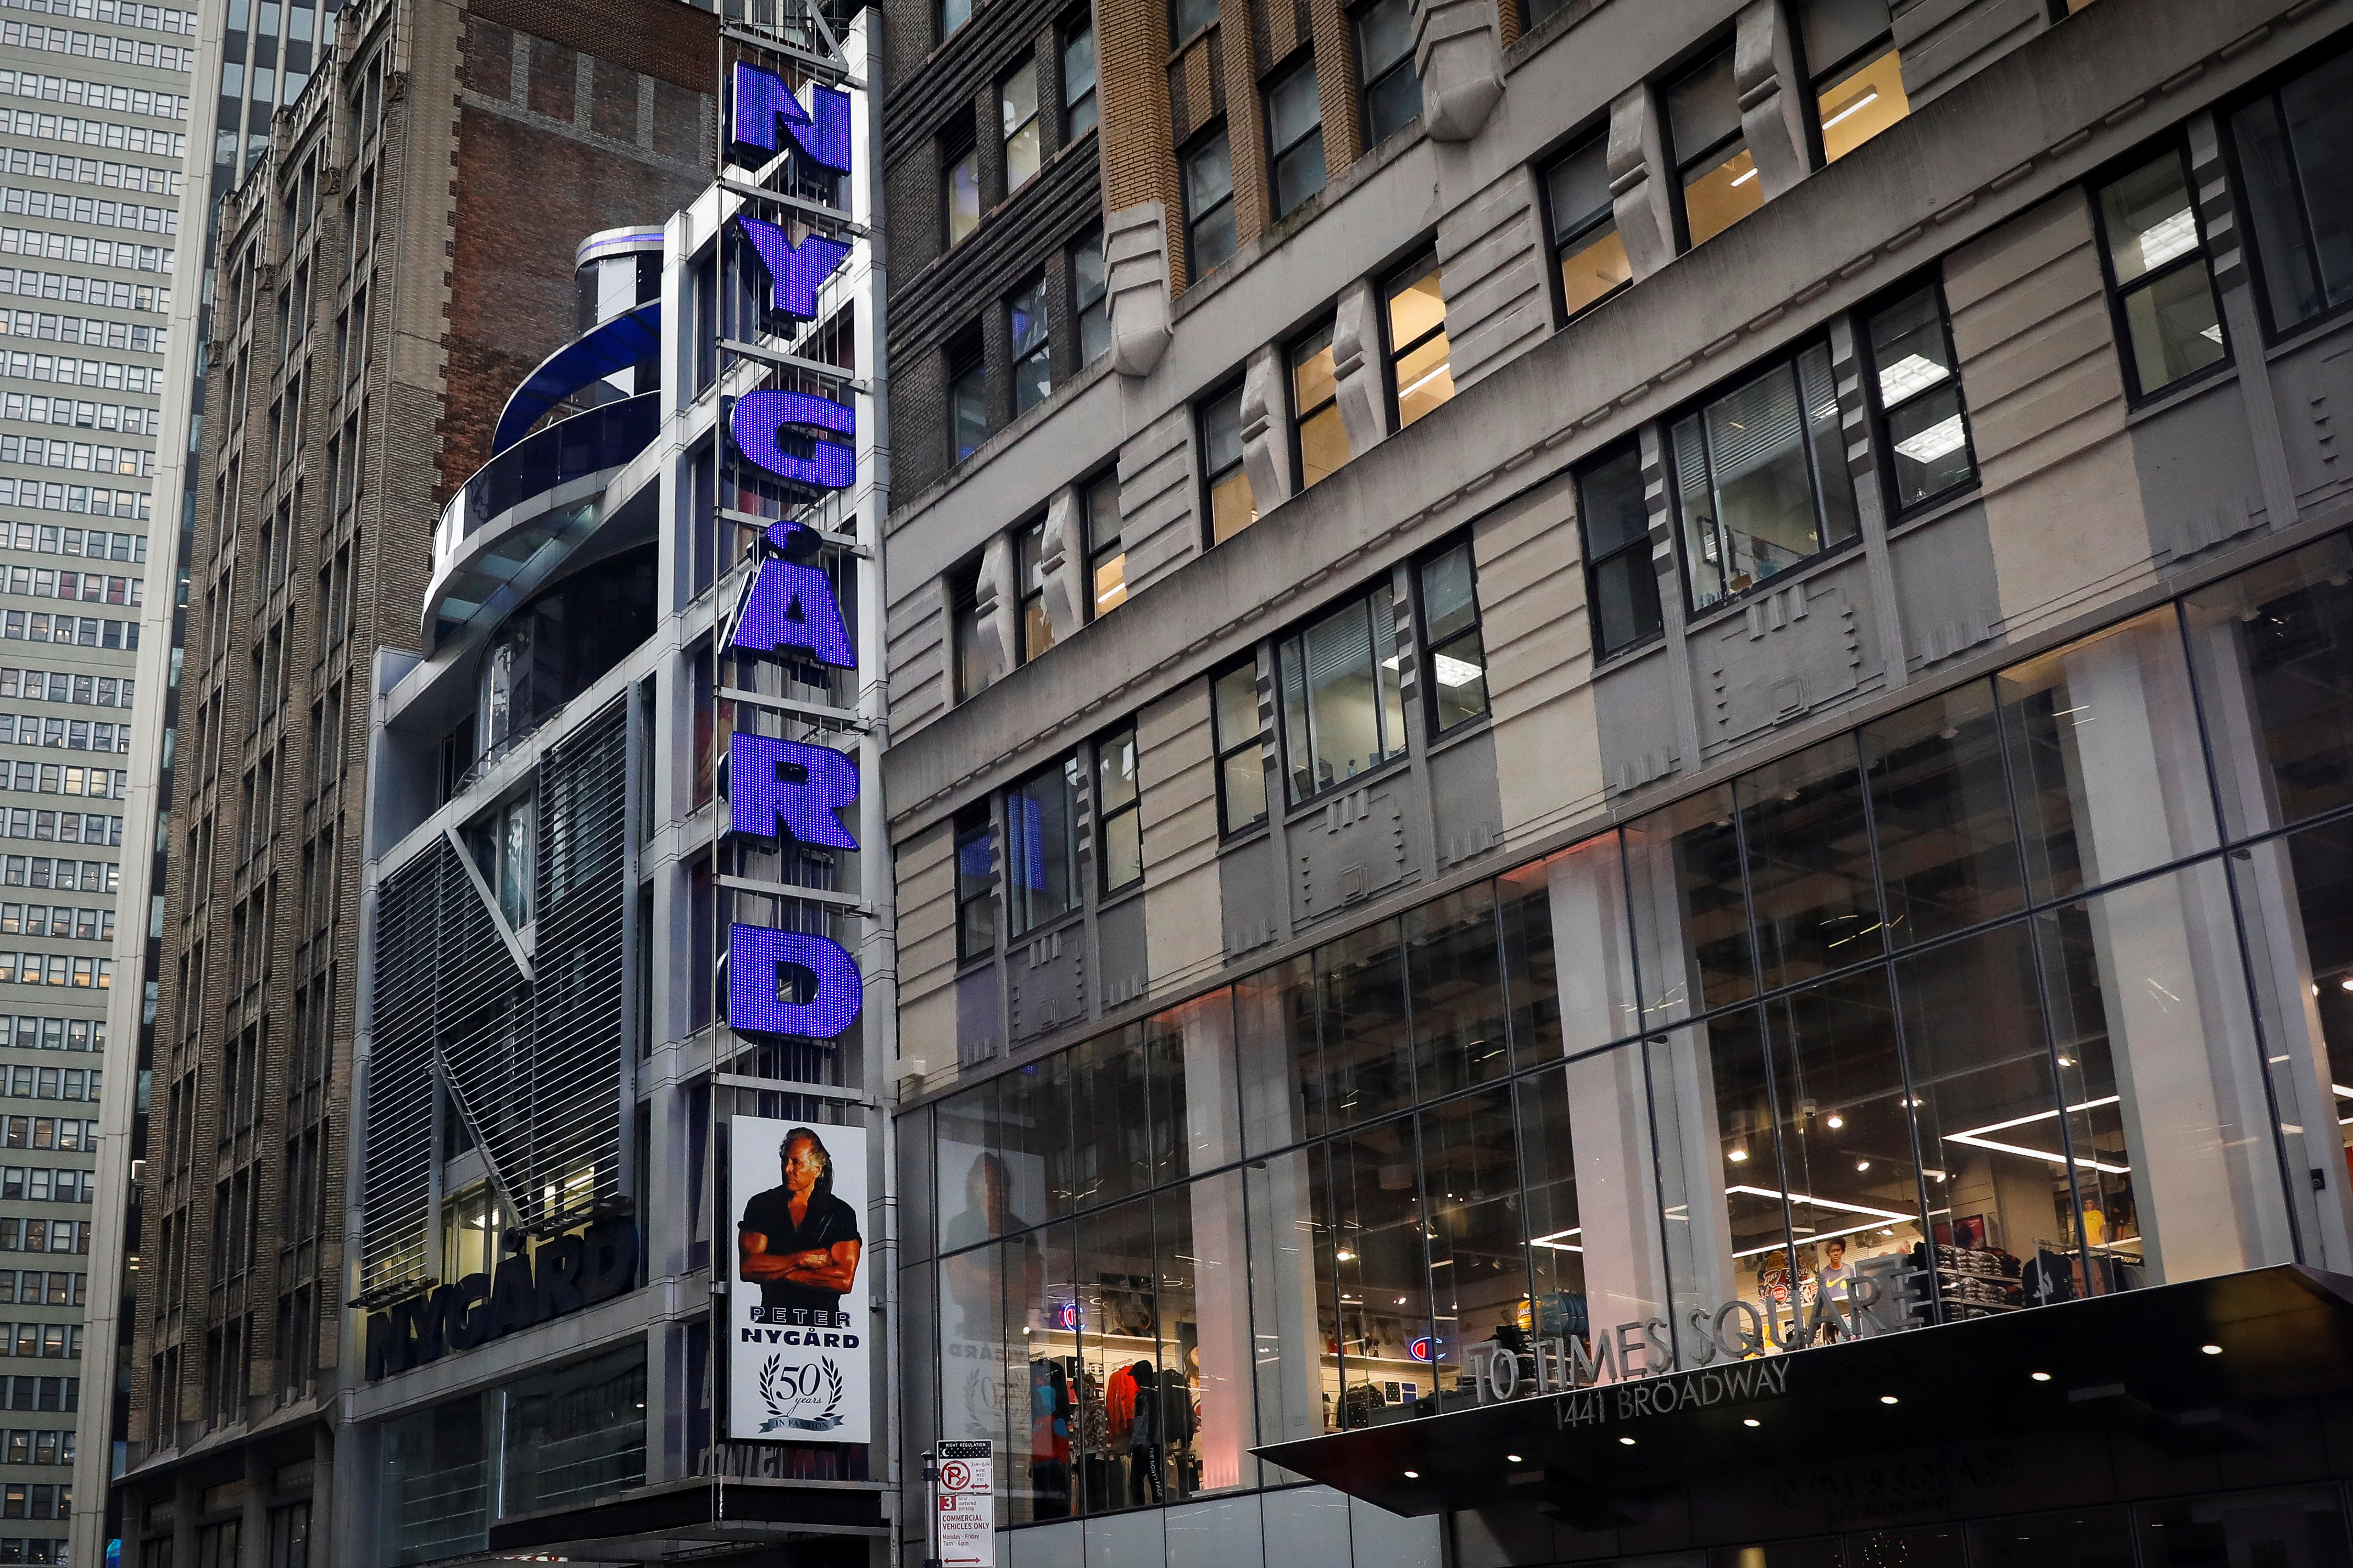 Fashion executive and designer Peter Nygard's headquarters and flagship store are seen near Times Square in New York